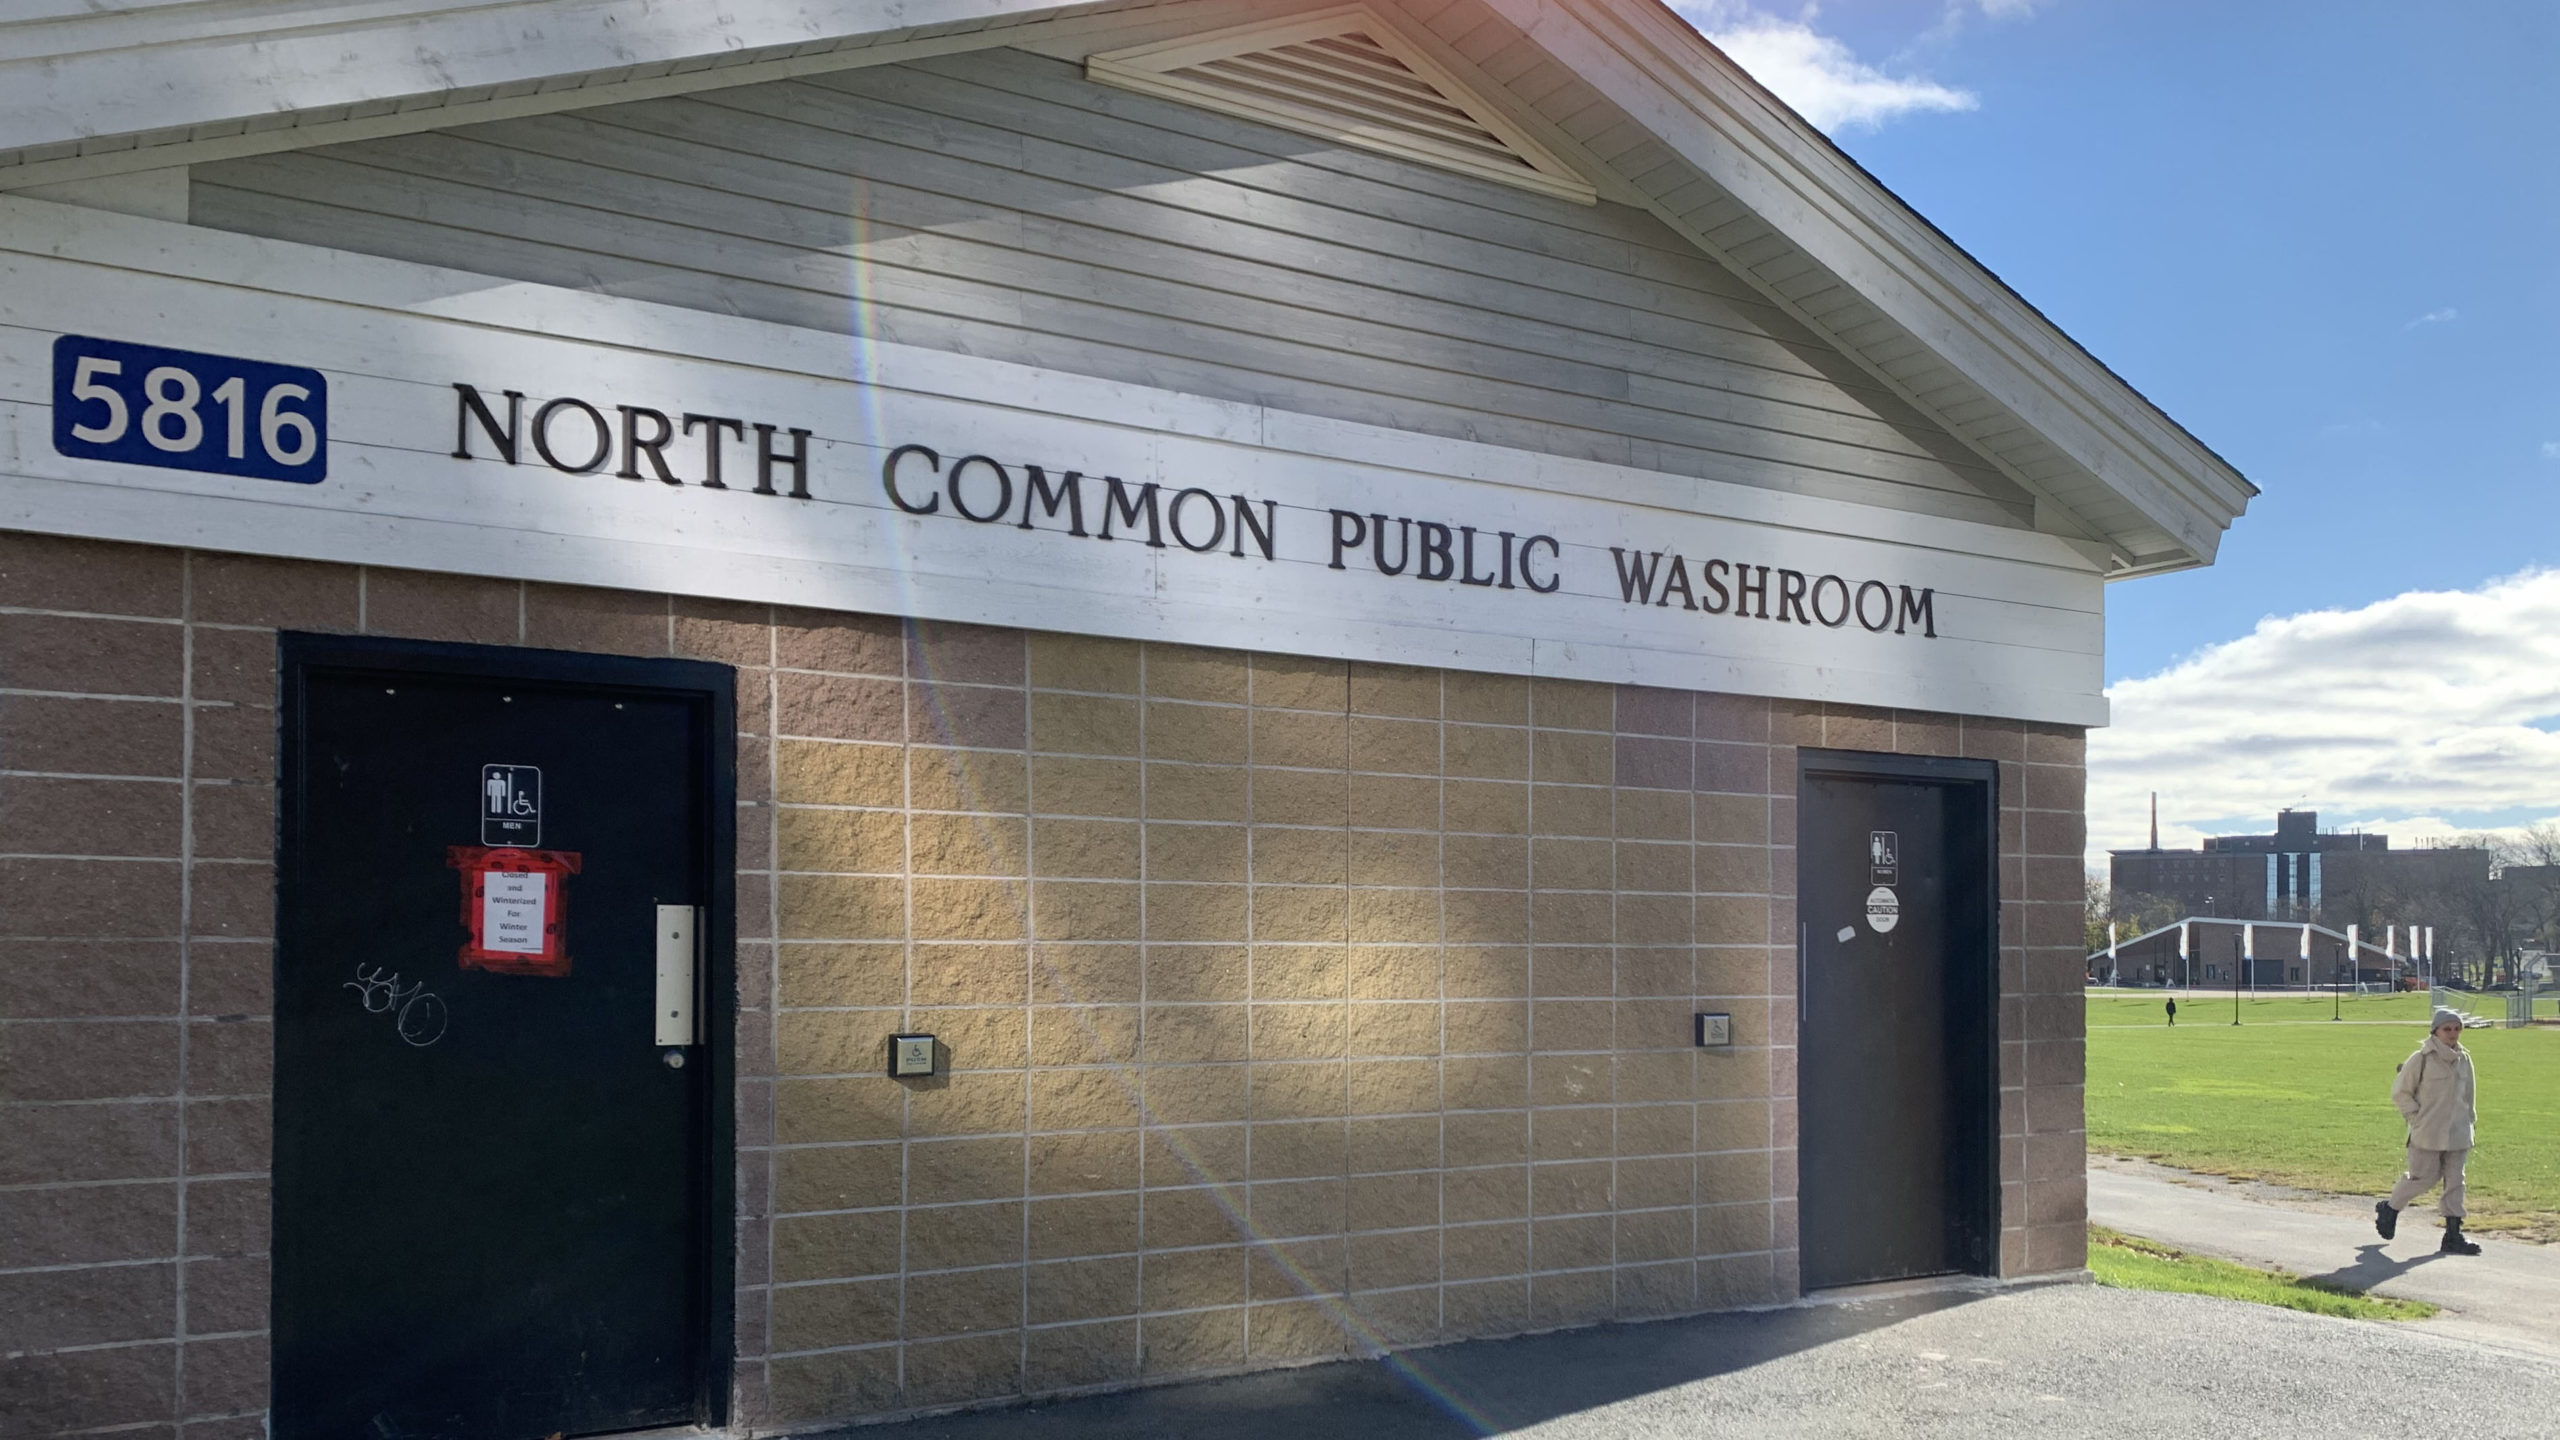 A sign on the North Common Public Washroom reads "Closed and winterized for winter season."